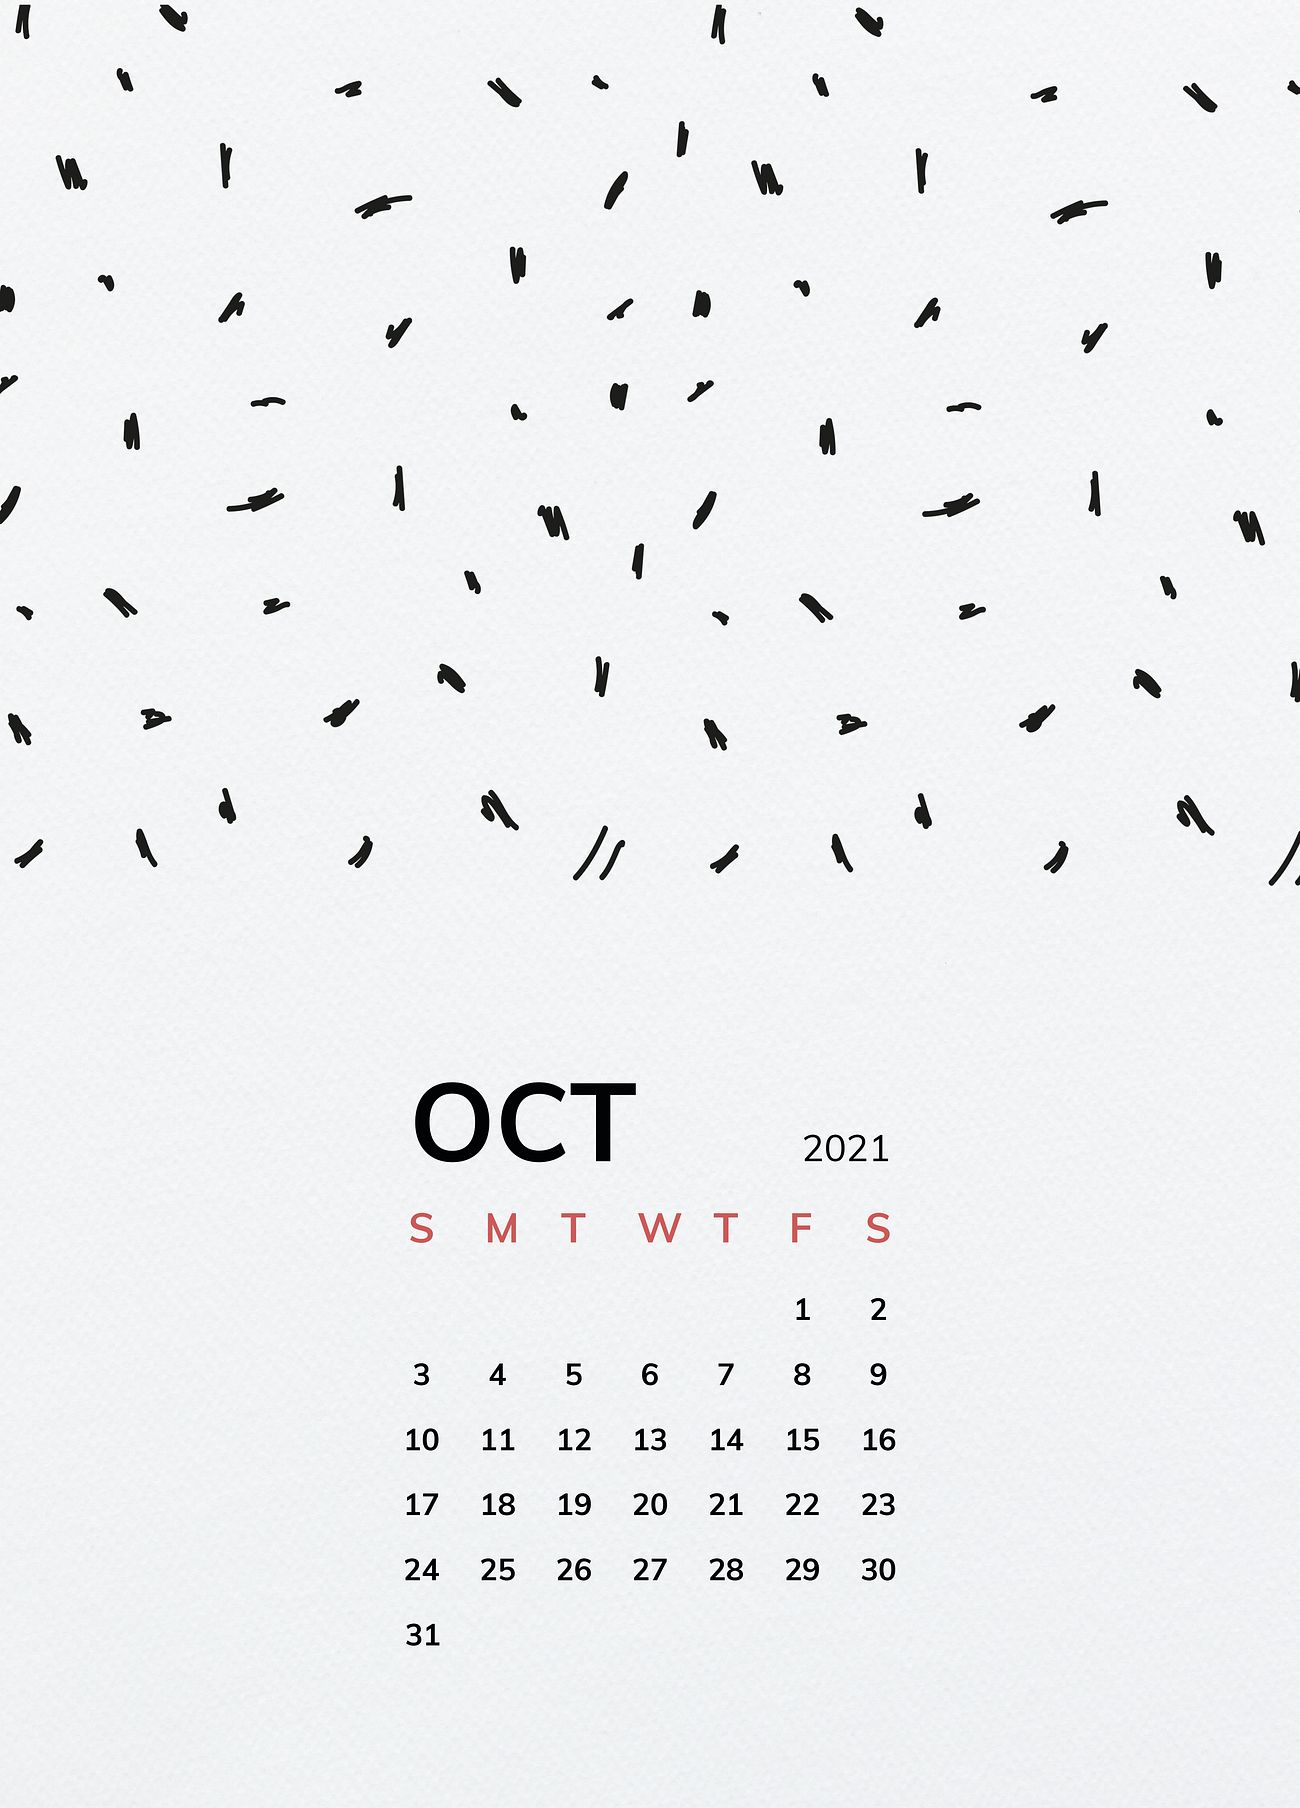 October Black And White Images | Free Vectors, PNGs, Mockups & Backgrounds - rawpixel